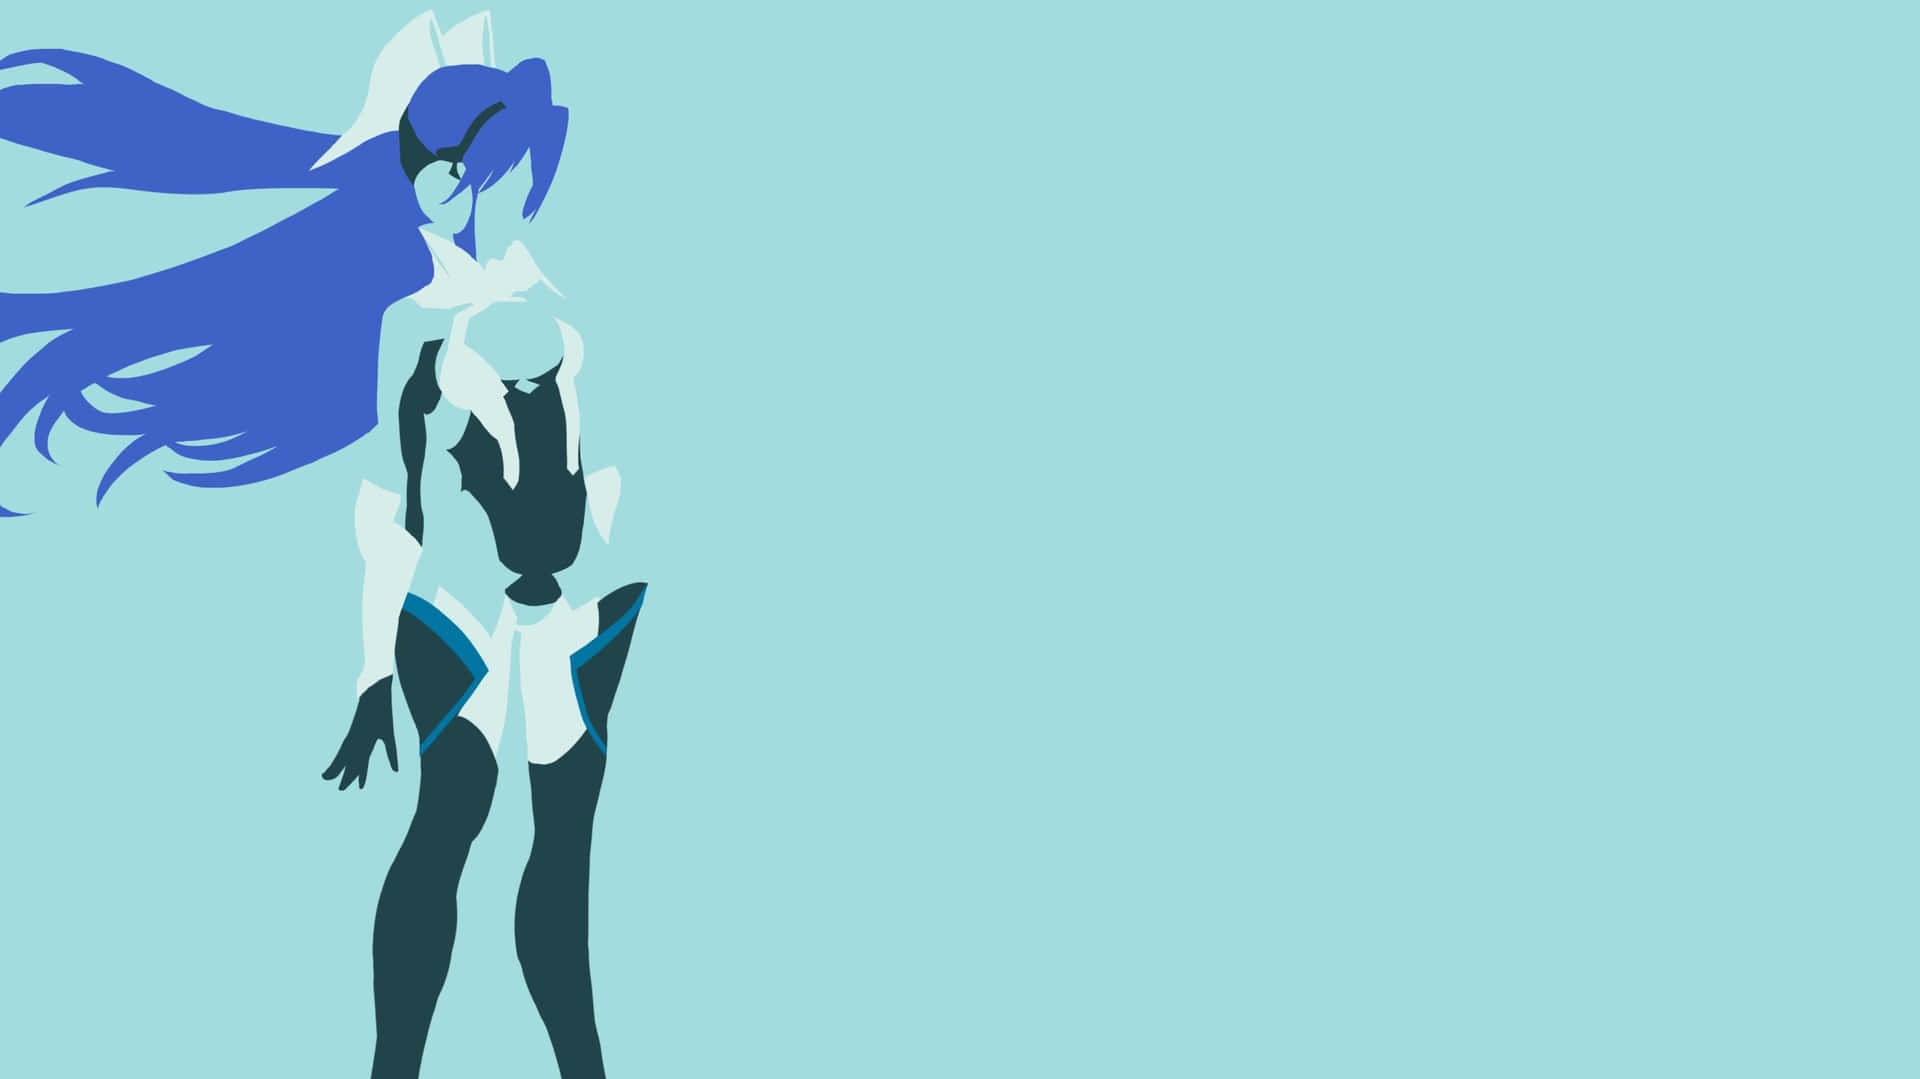 Image  Anime characters in a minimalist artistic design Wallpaper